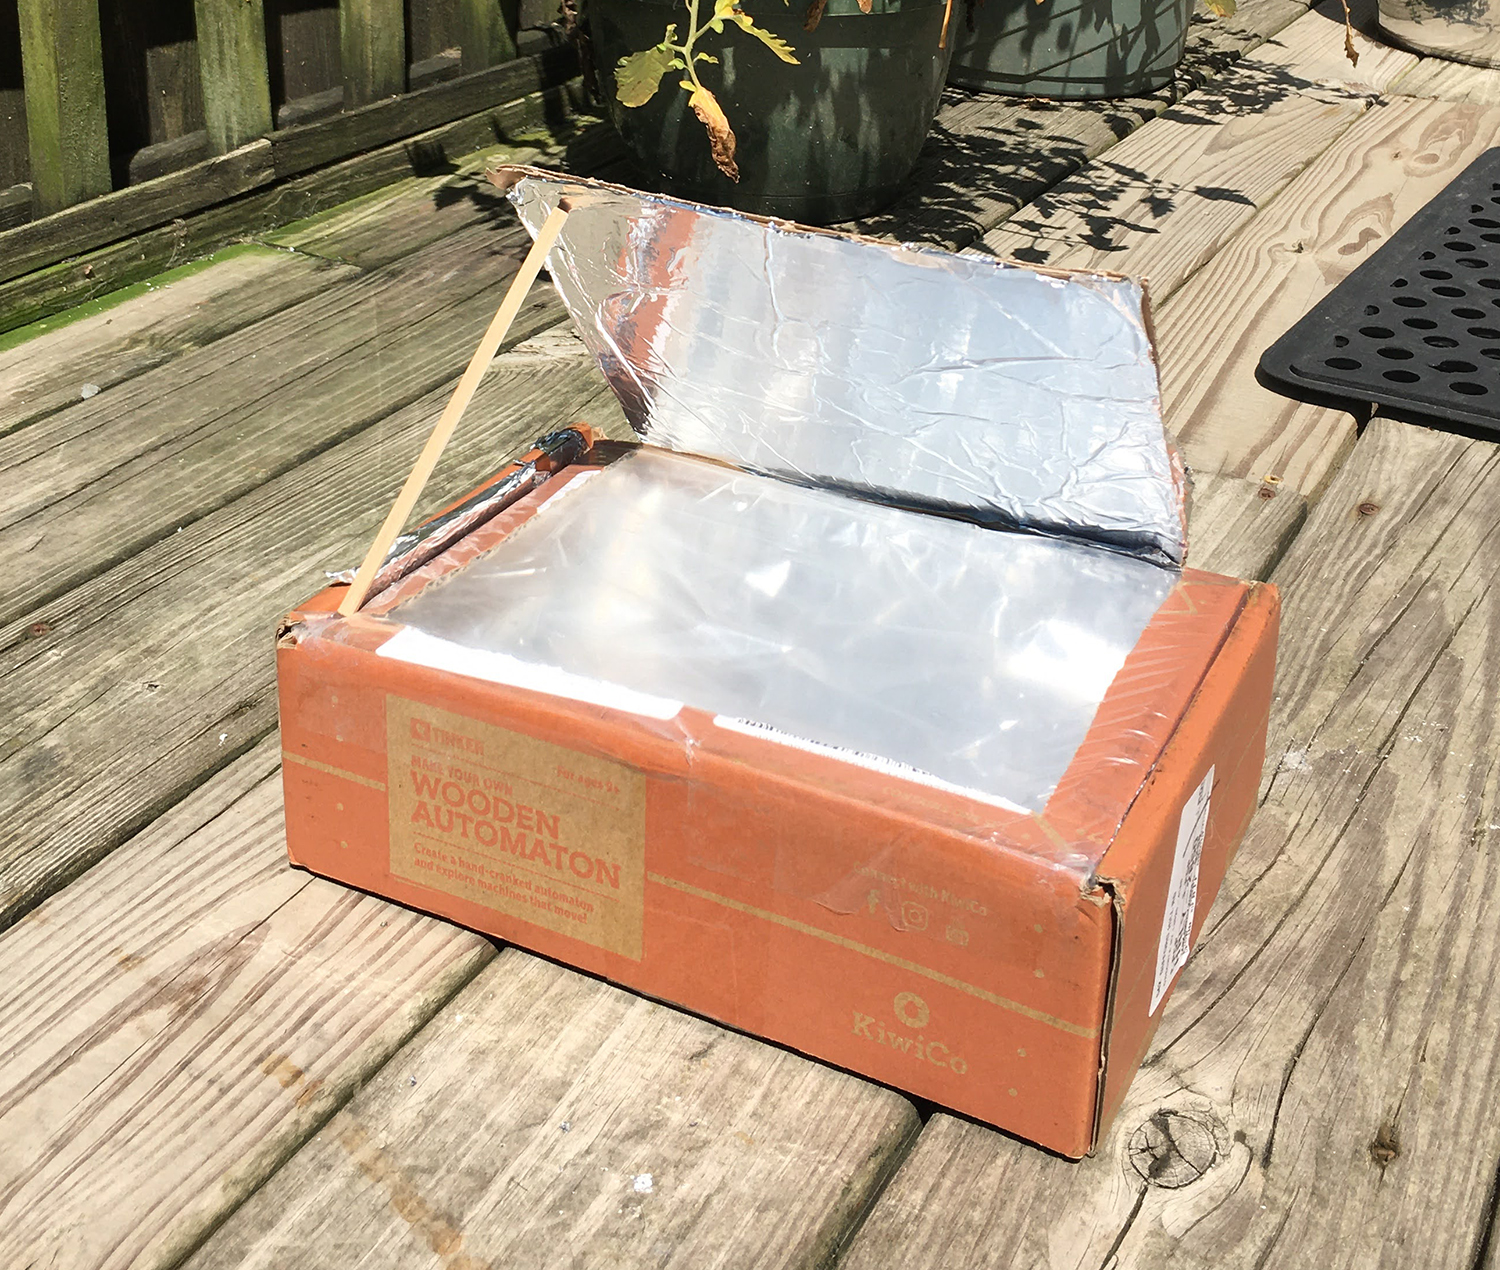 Solar oven on a porch